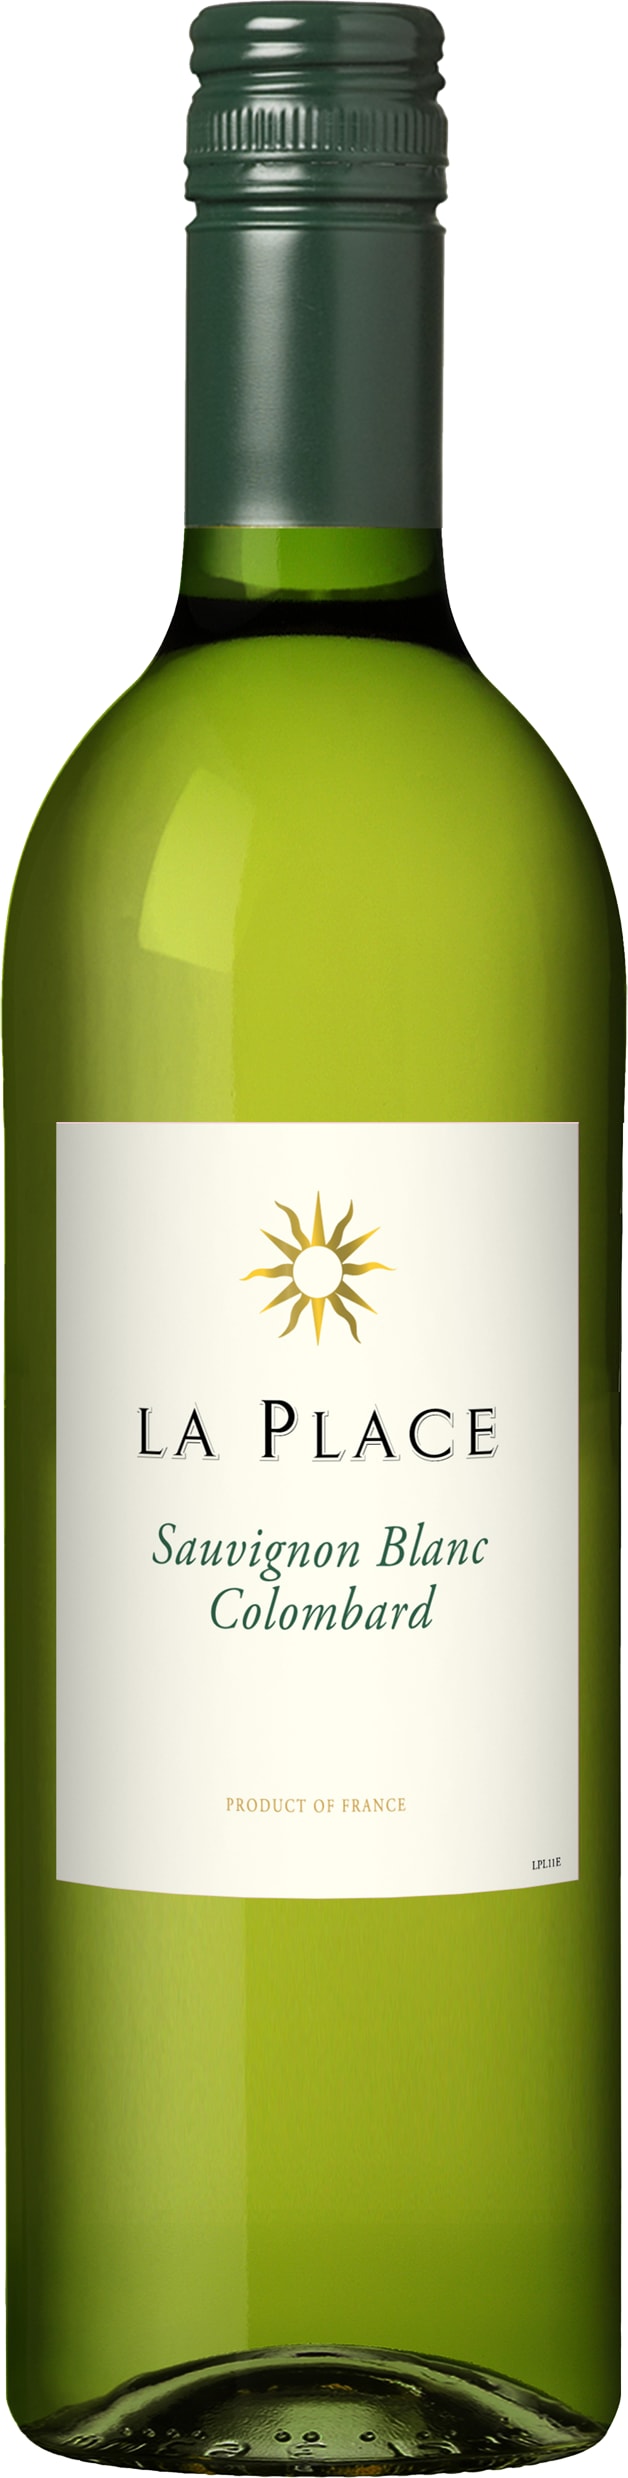 Sauvignon Blanc Colombard 22 La Place 75cl - Buy La Place Wines from GREAT WINES DIRECT wine shop